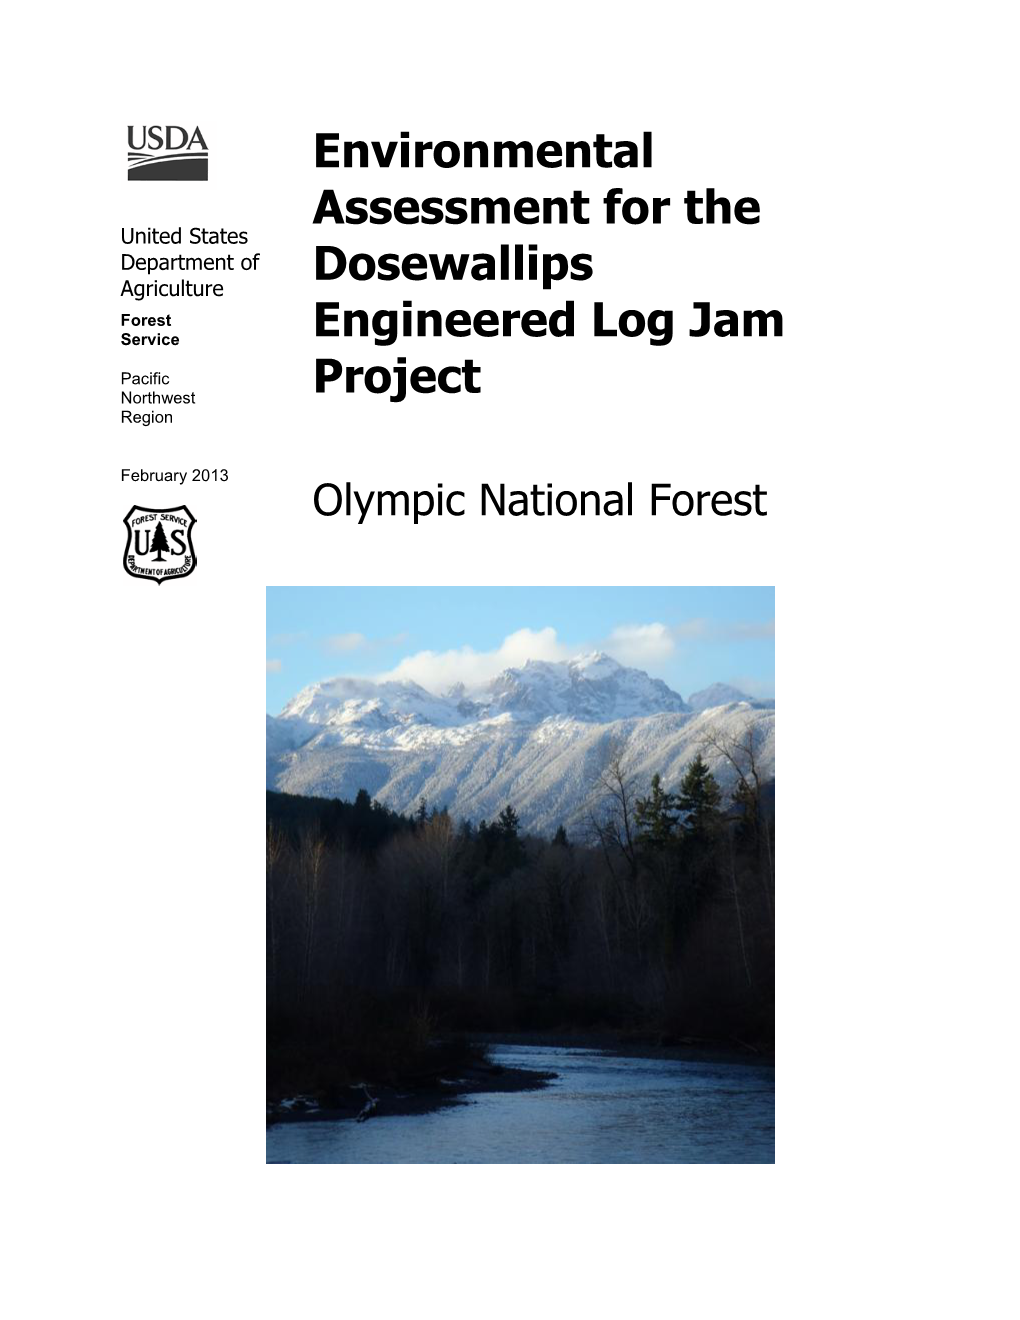 Environmental Assessment for the Dosewallips Engineered Log Jam Project